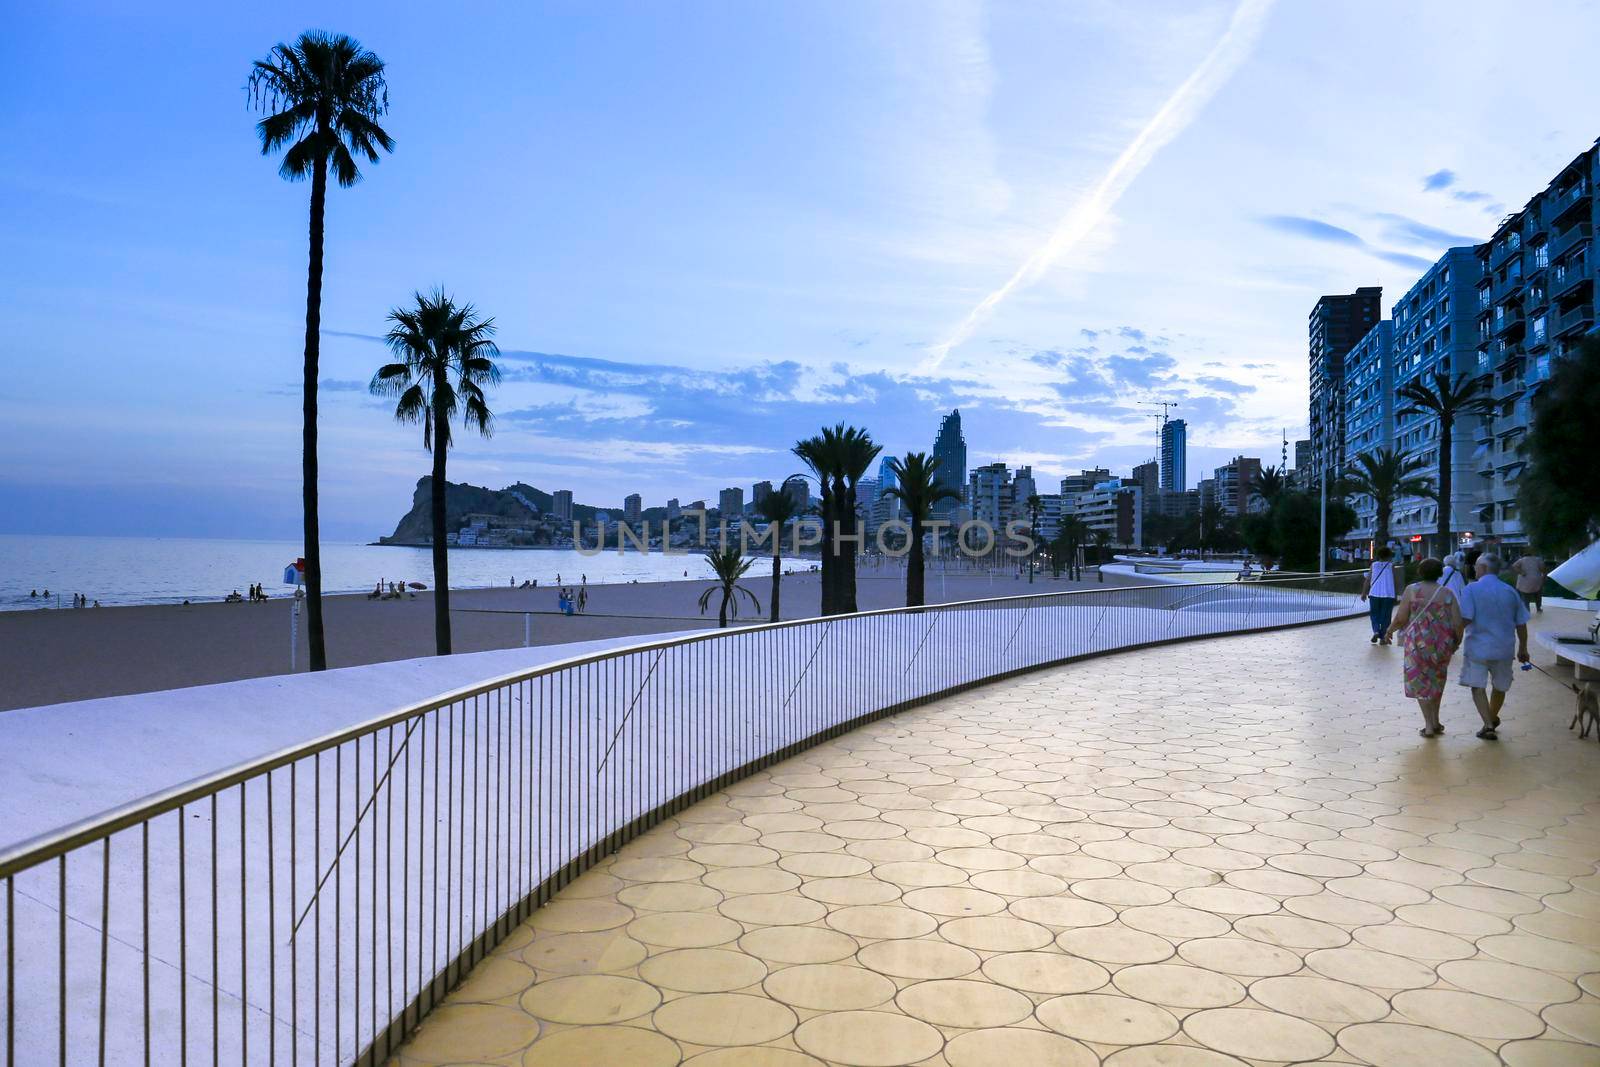 Benidorm, Alicante, Spain- September 11, 2022: Poniente beach with its beautiful promenade with access to the beach and viewpoint with modern design